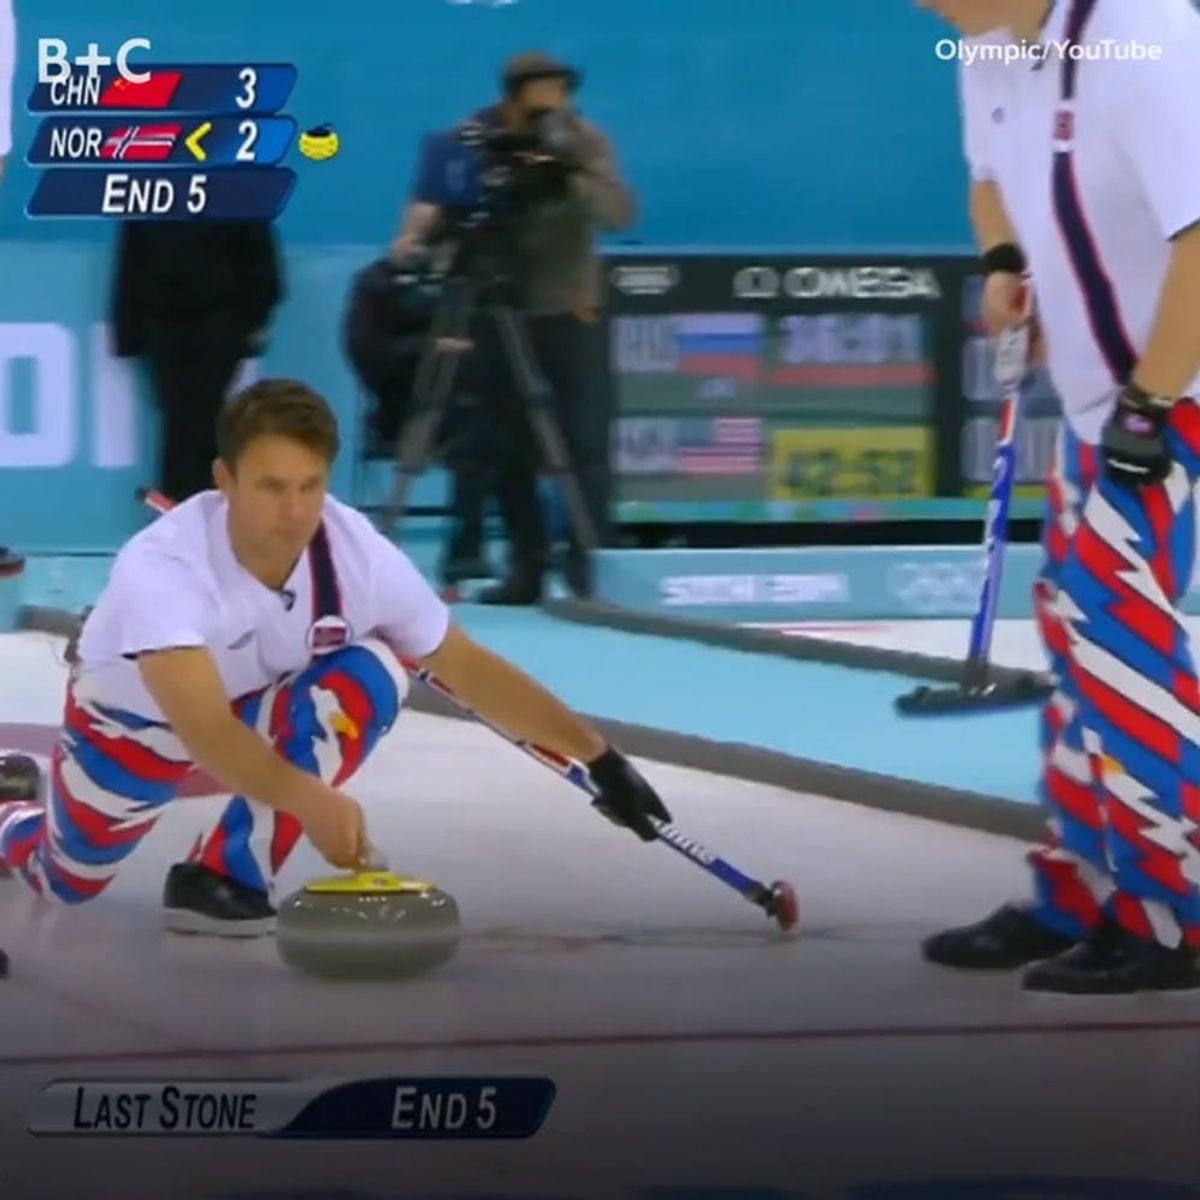 Norway’s Curling Team Has the Most EPIC Uniforms